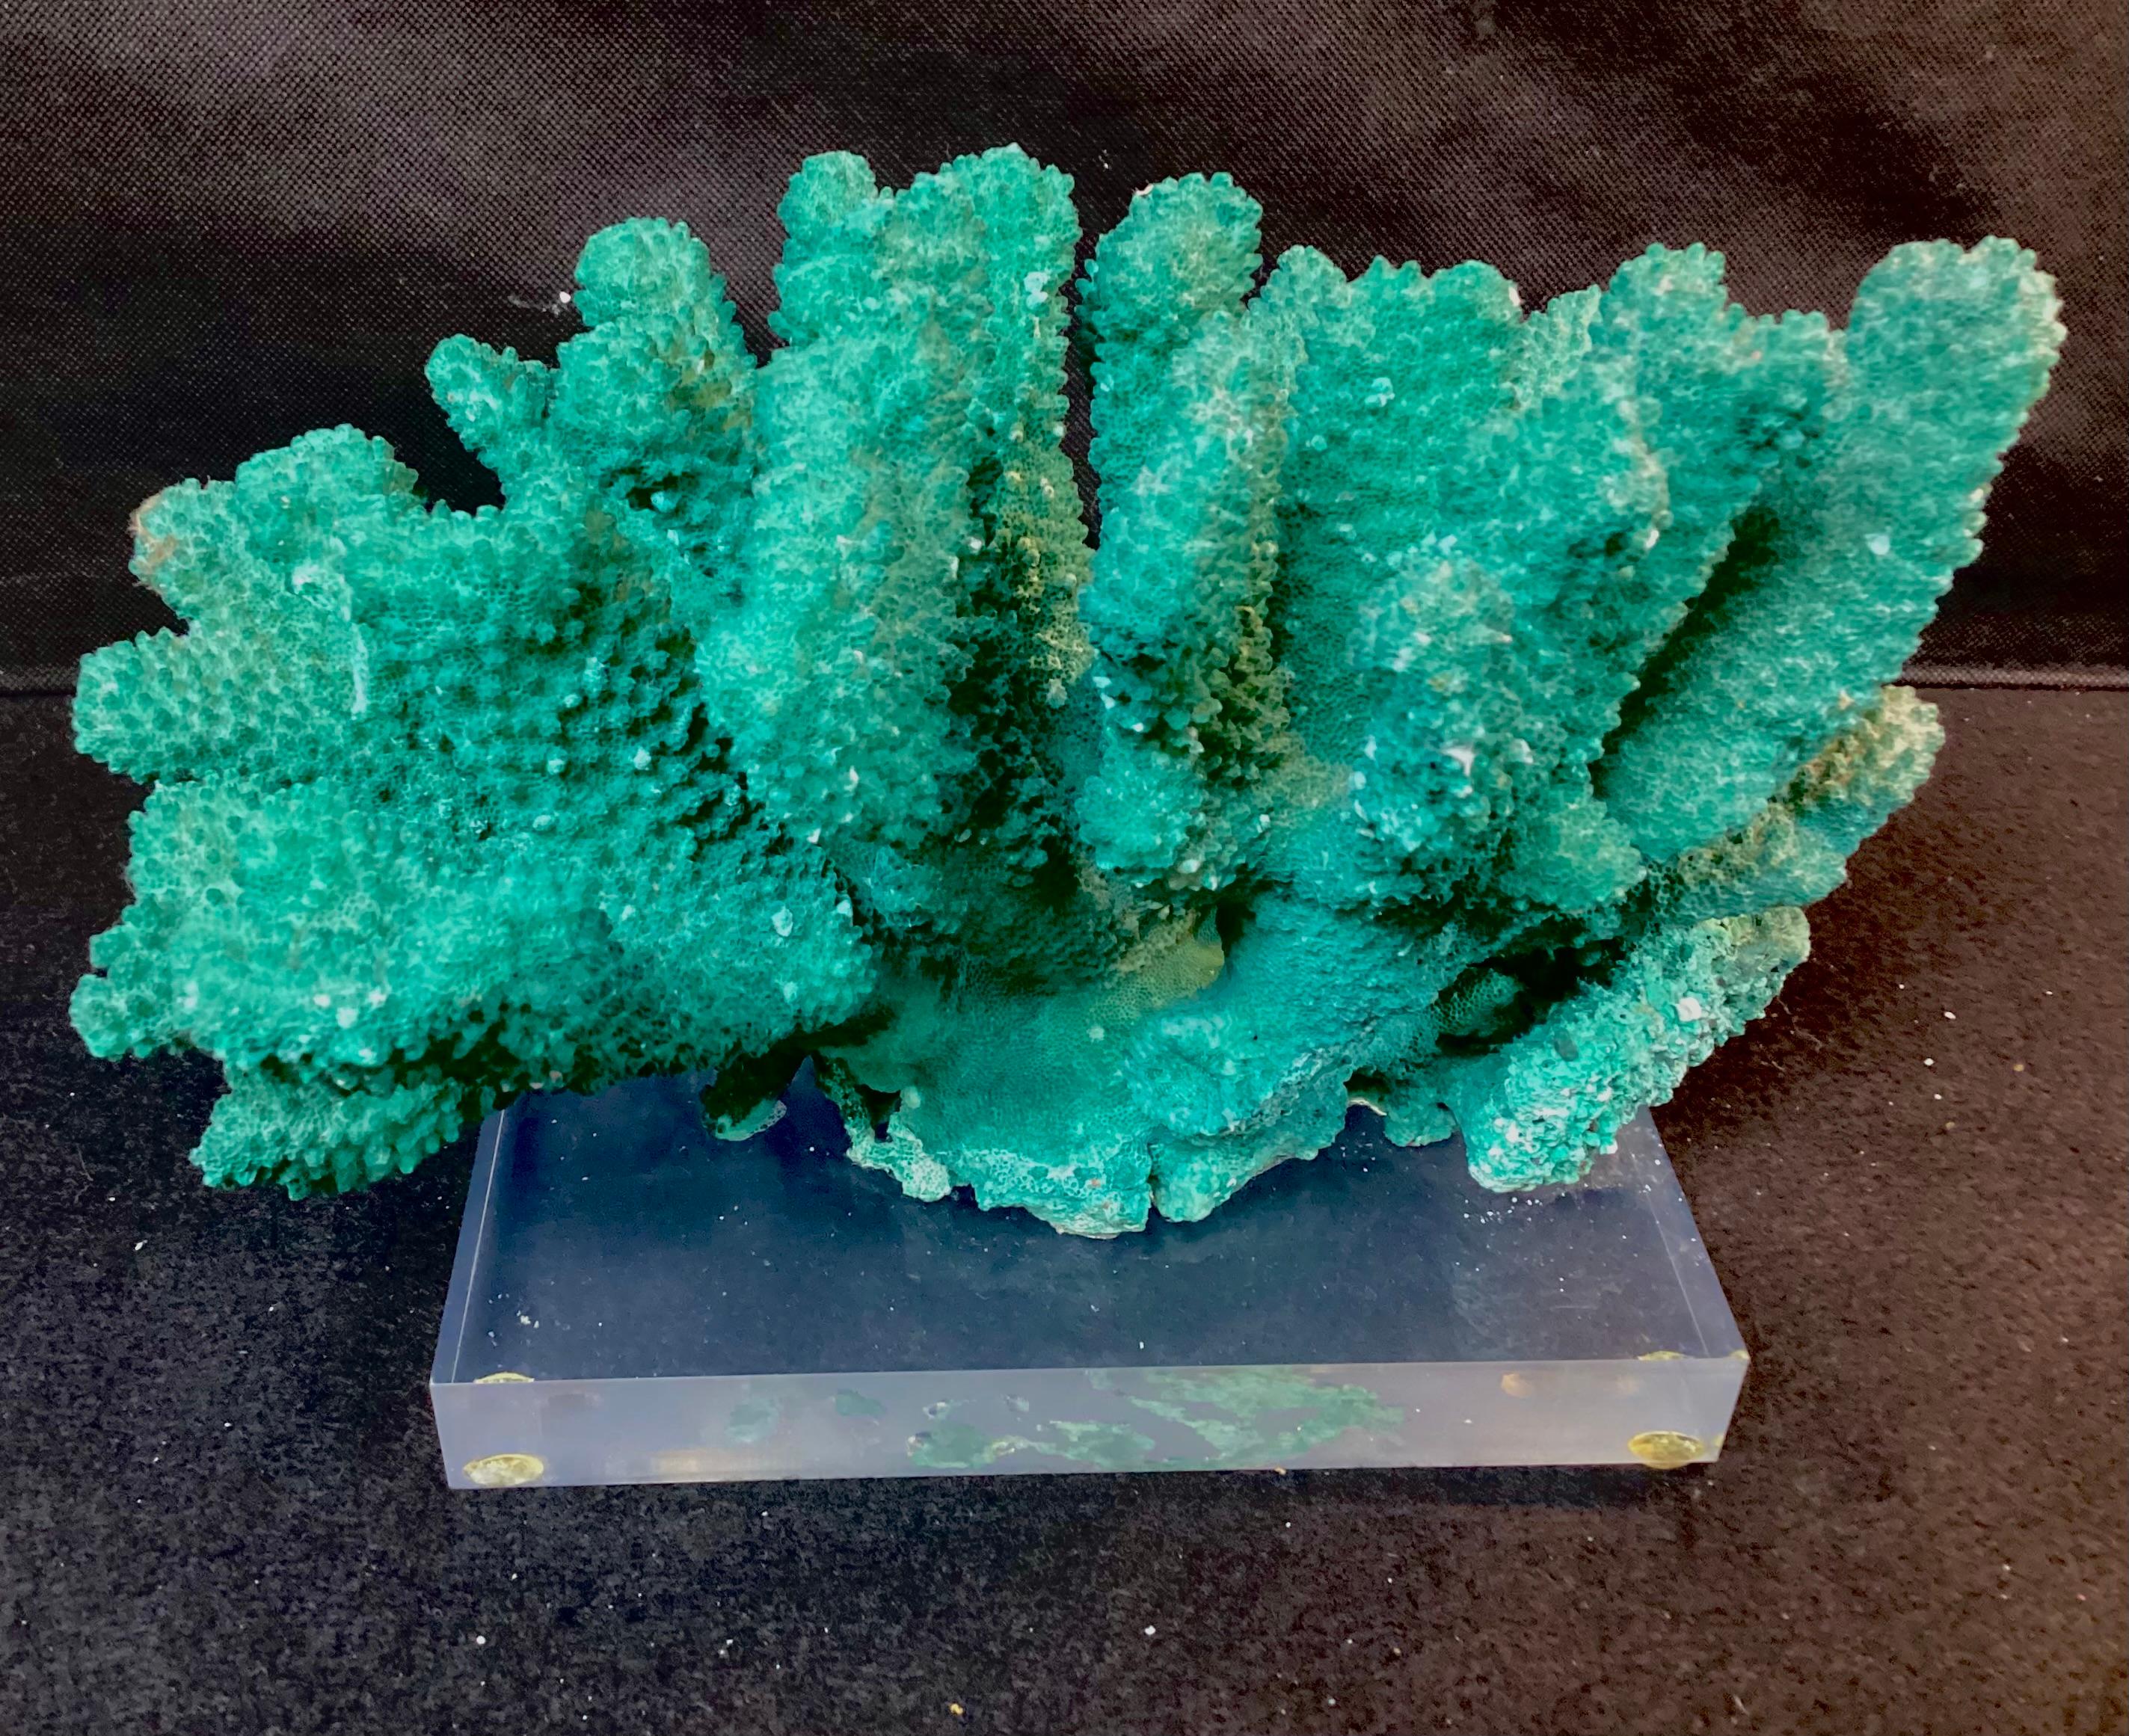 Dyed green coral reef specimen, mounted on a clear Lucite base. Nice size to use as coastal, nautical, or beach decor.

